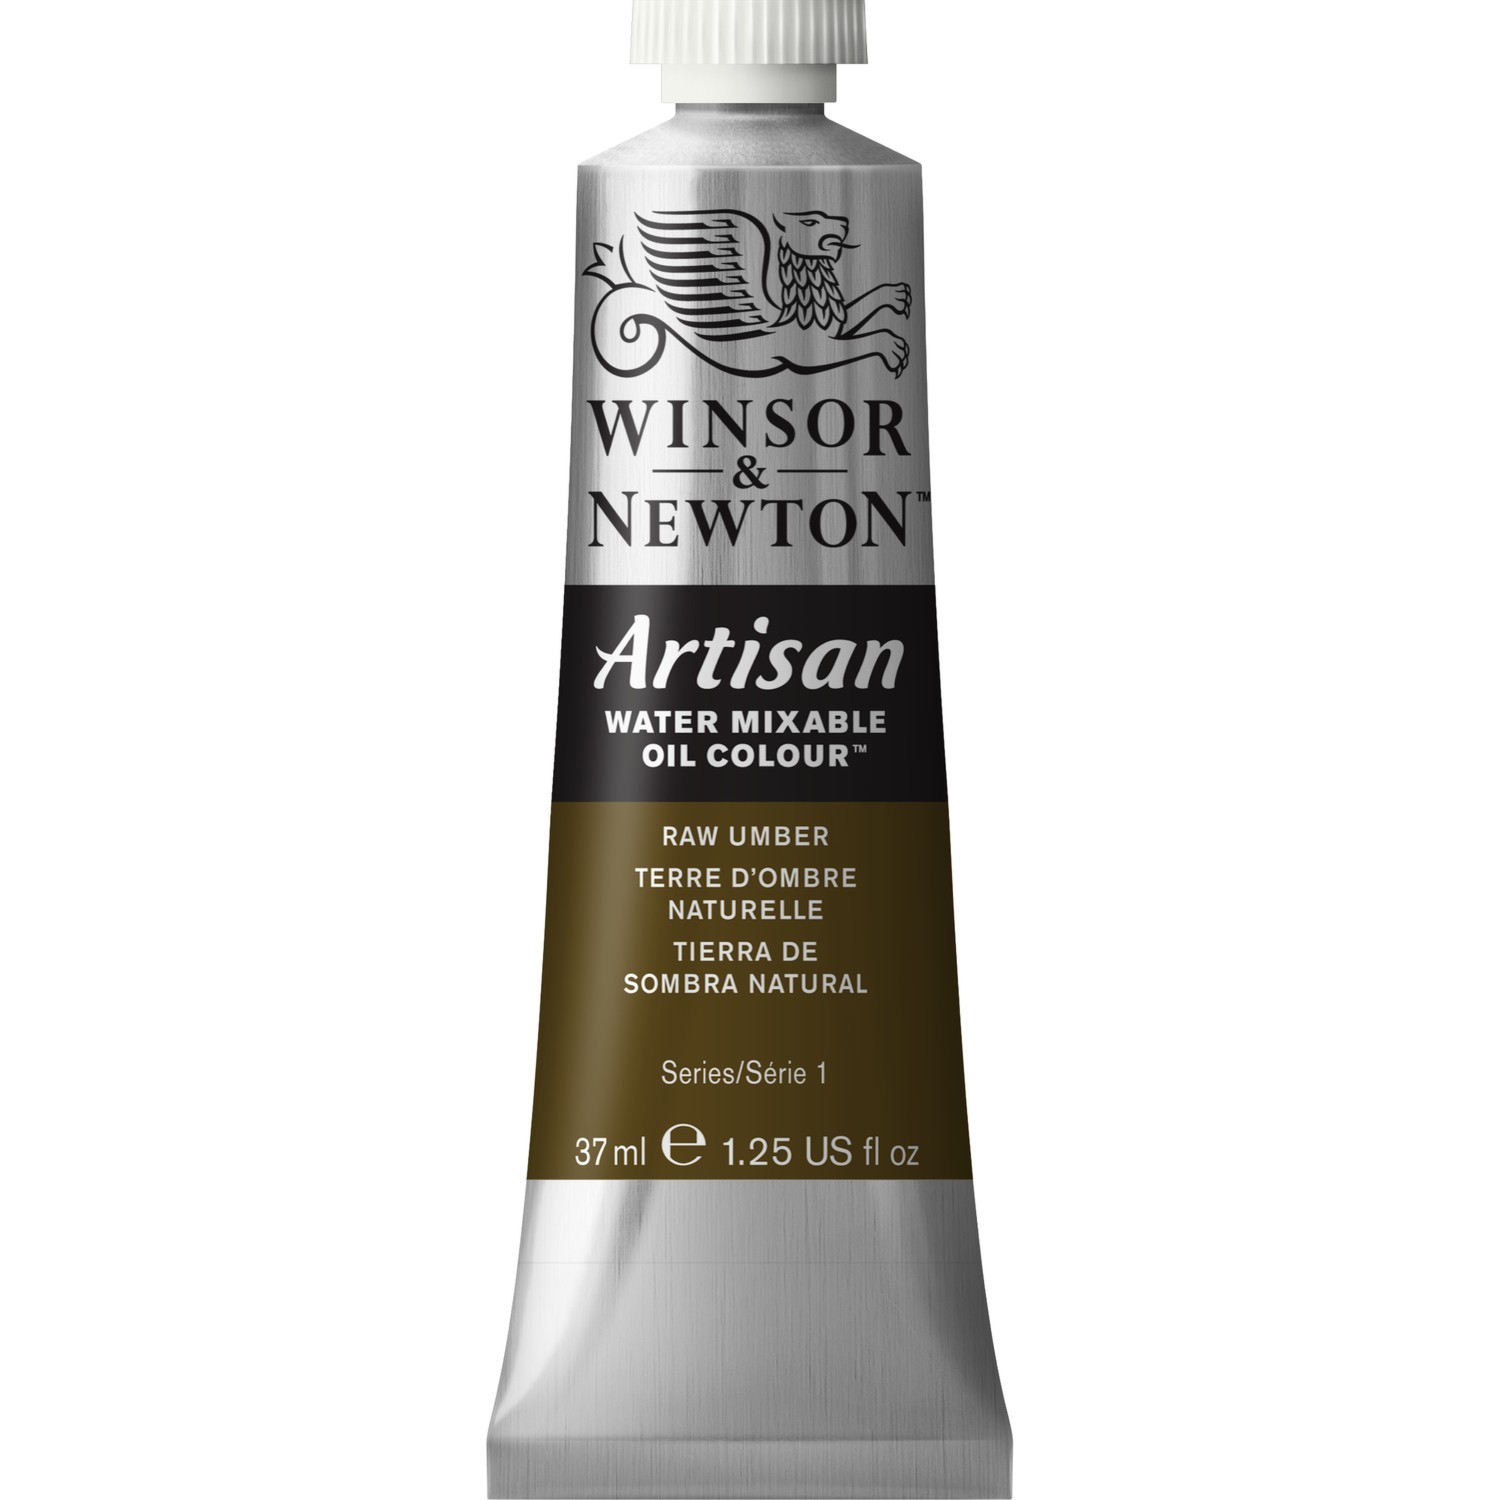 Winsor and Newton 37ml Artisan Mixable Oil Paint - Raw Umber Image 1